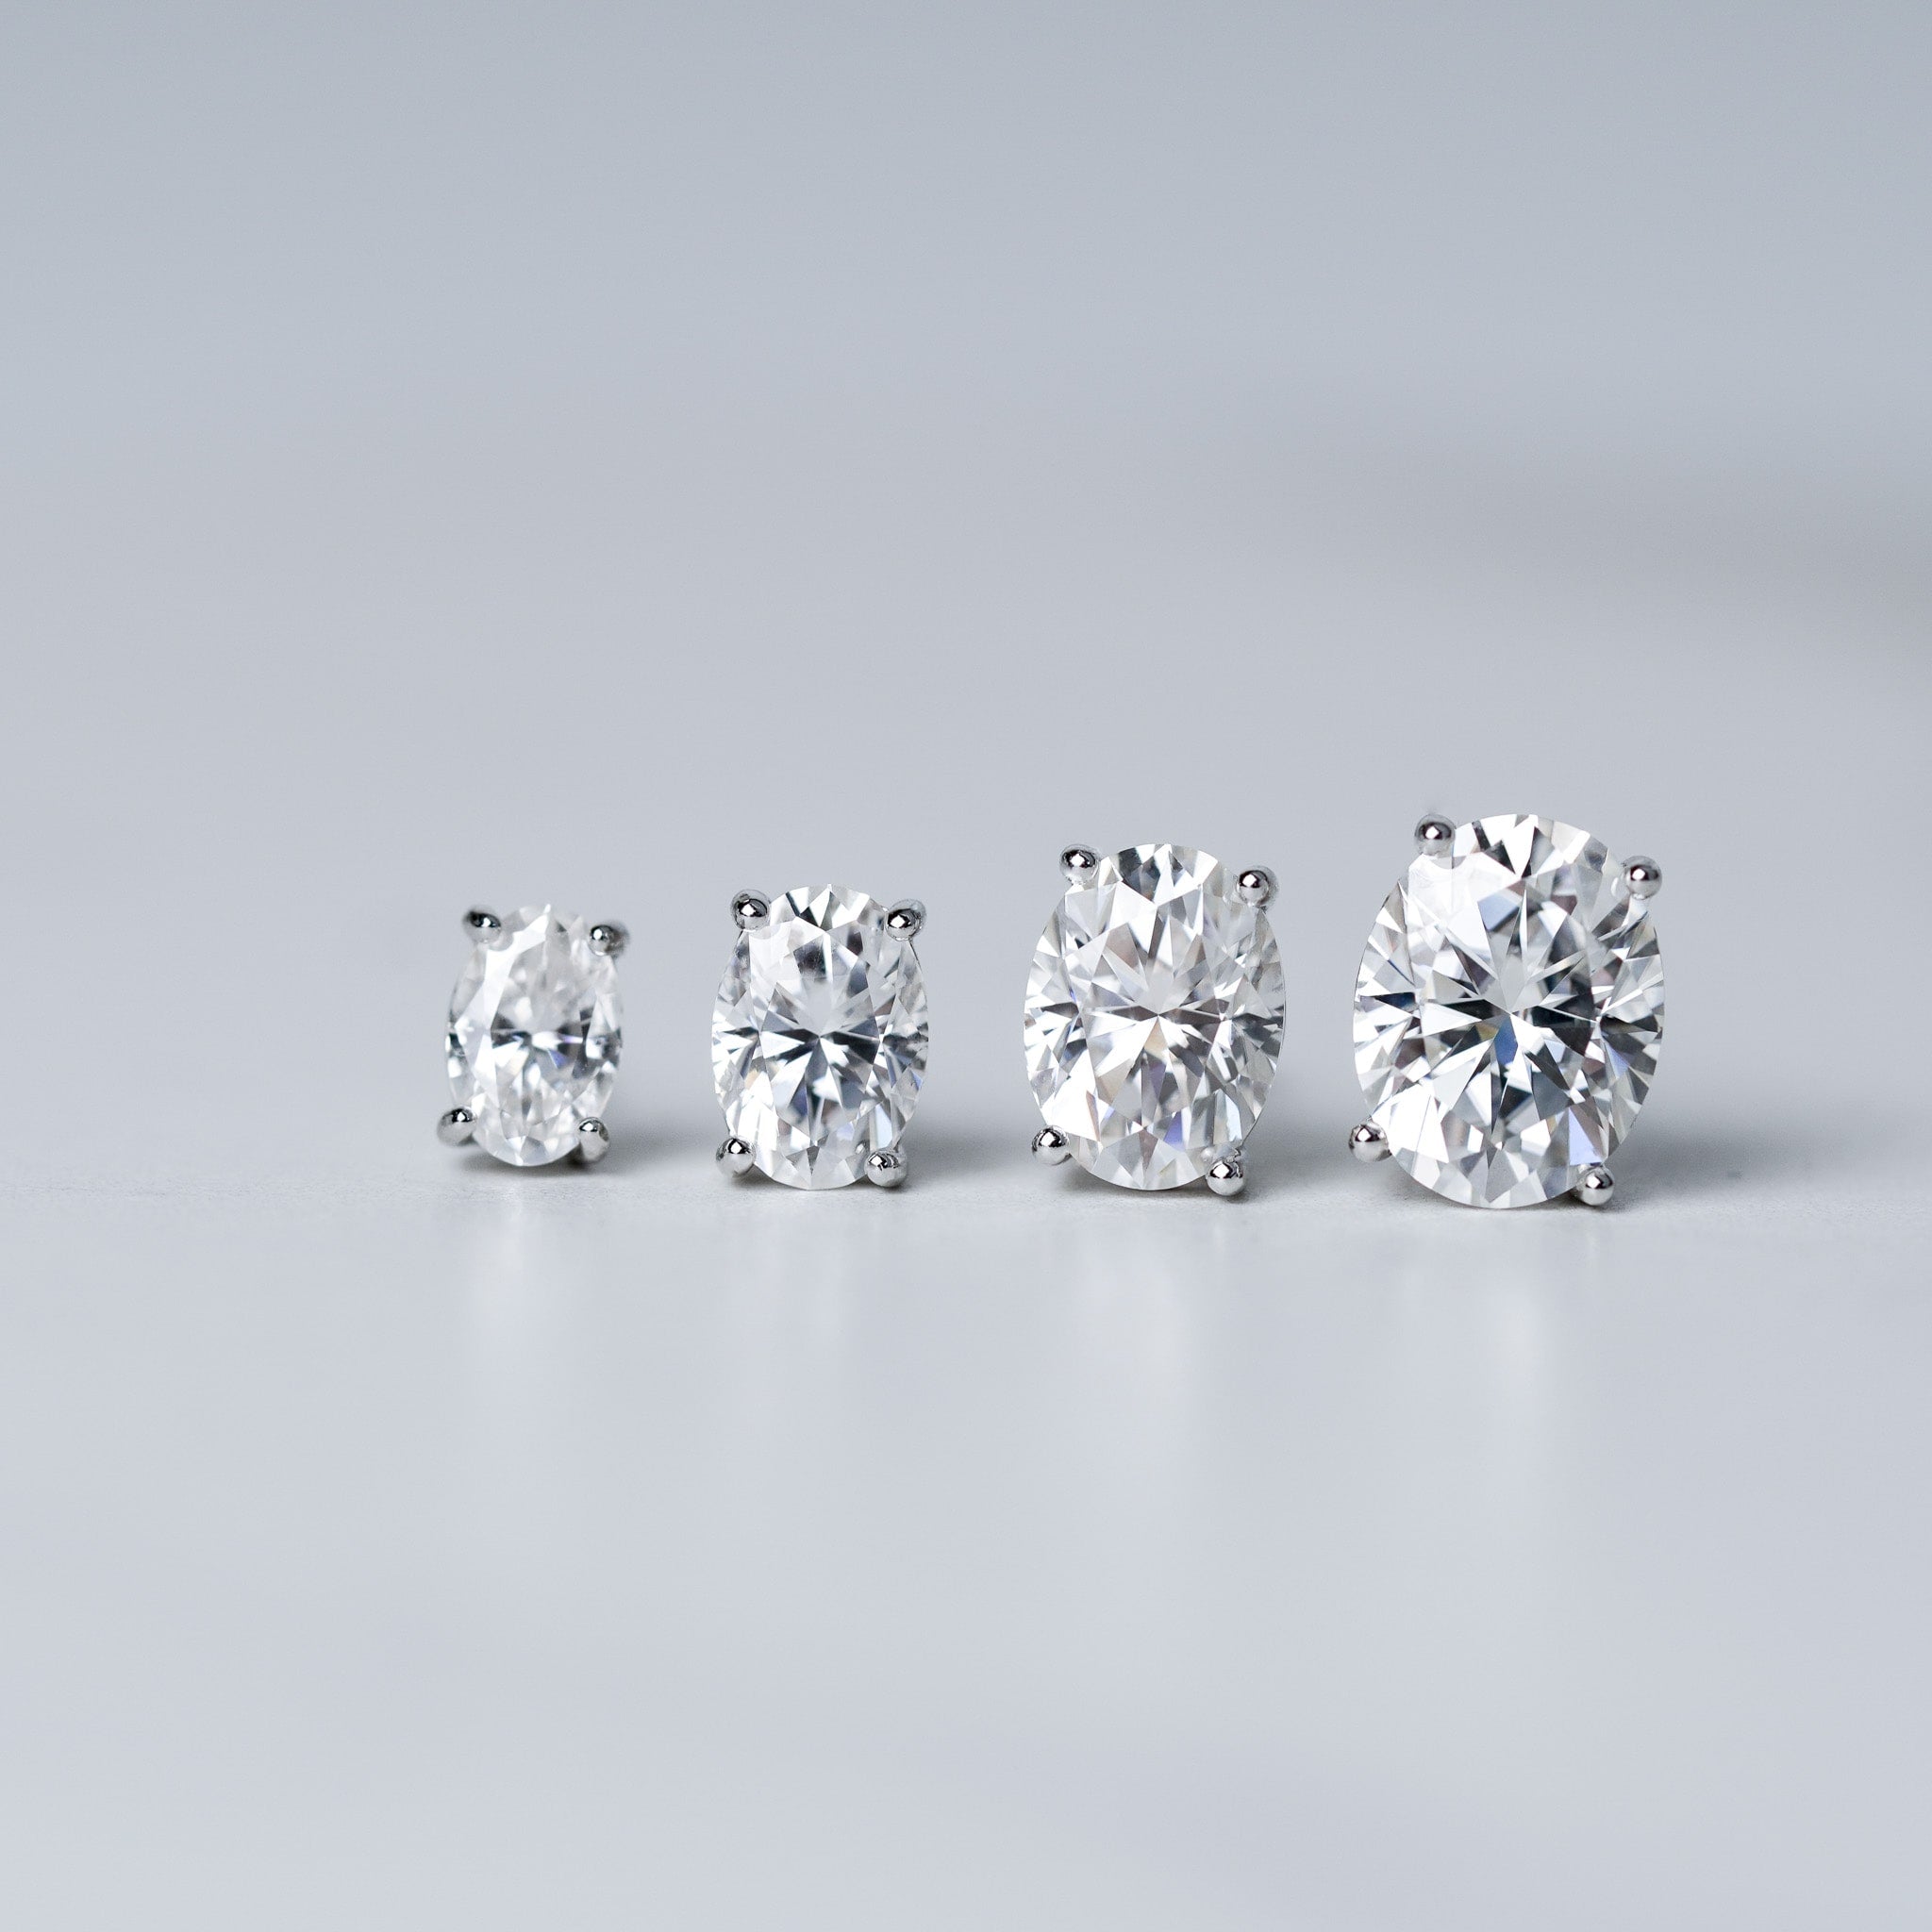 Moissanite Oval Cut Solitaire Stud Earrings - Screwed Back